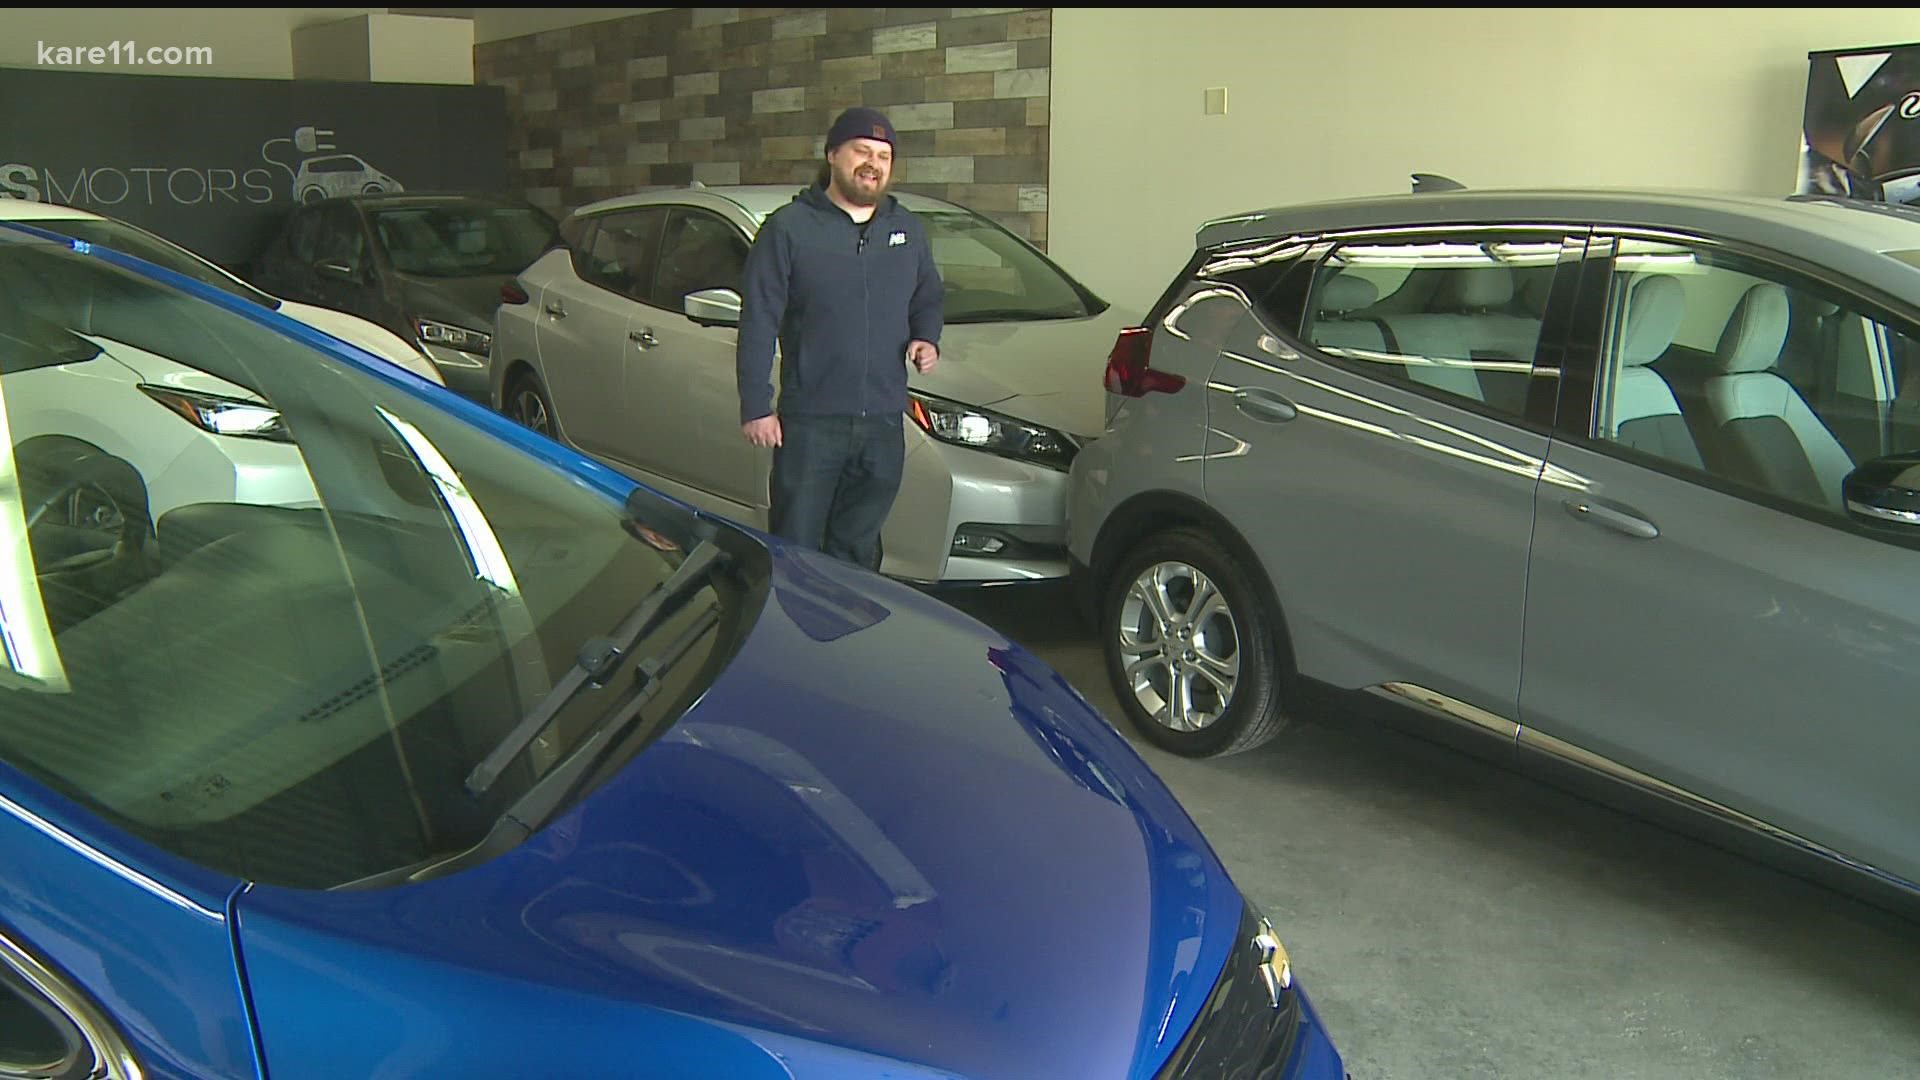 Car dealerships are noticing more people driving electric vehicles off their lots, a move they say is due to higher gas prices.